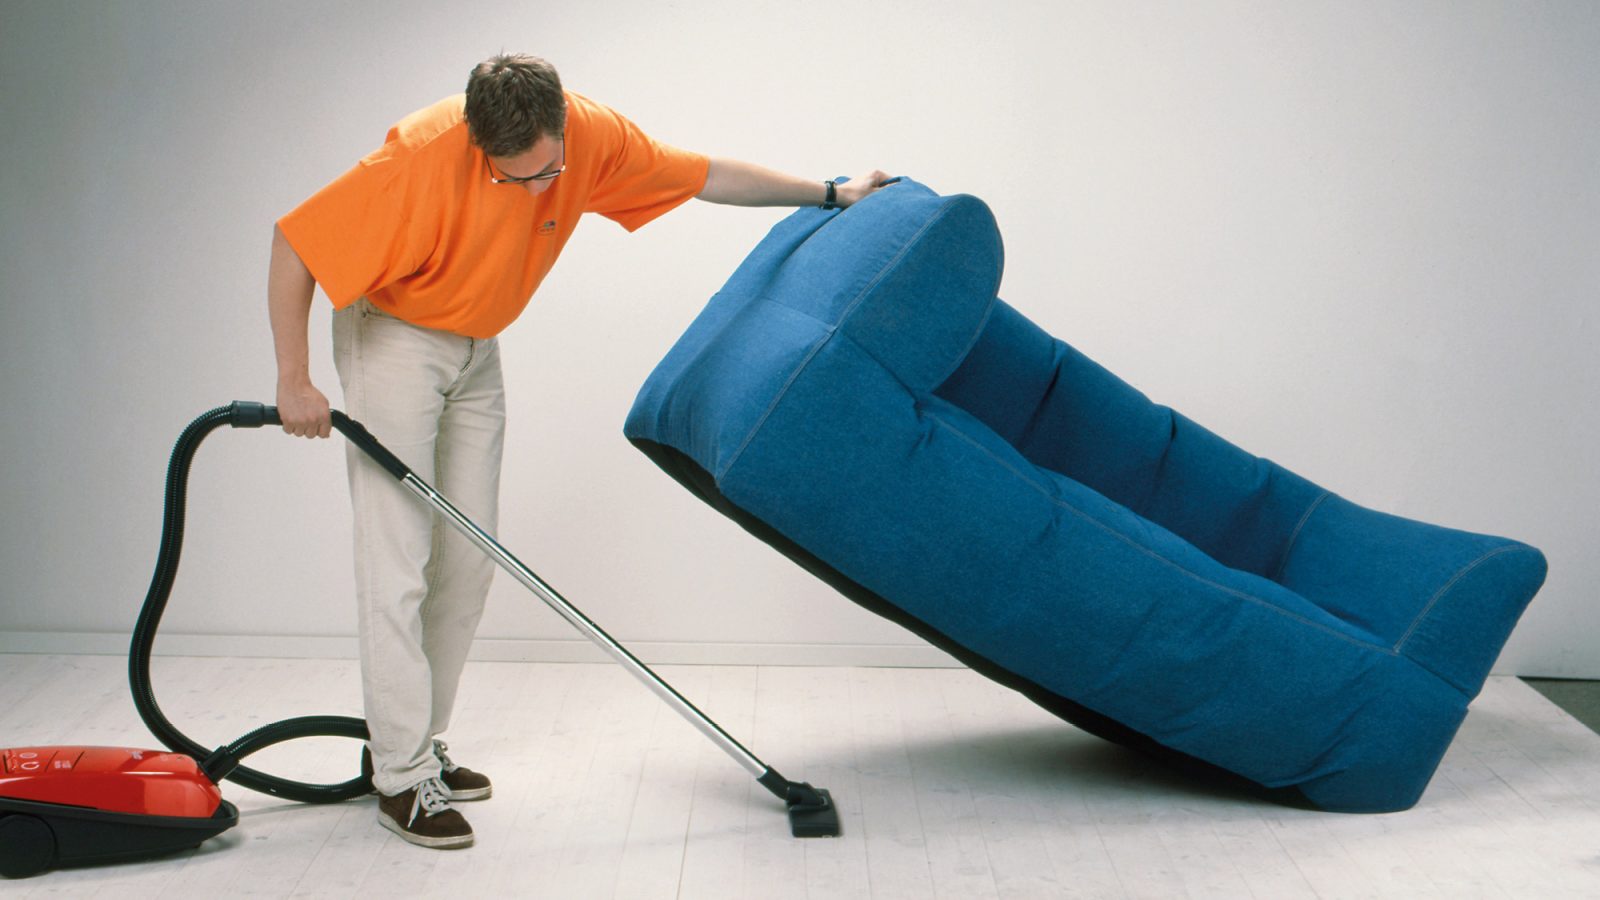 Man in orange T-shirt lifts blue sofa with one hand to vacuum underneath it.